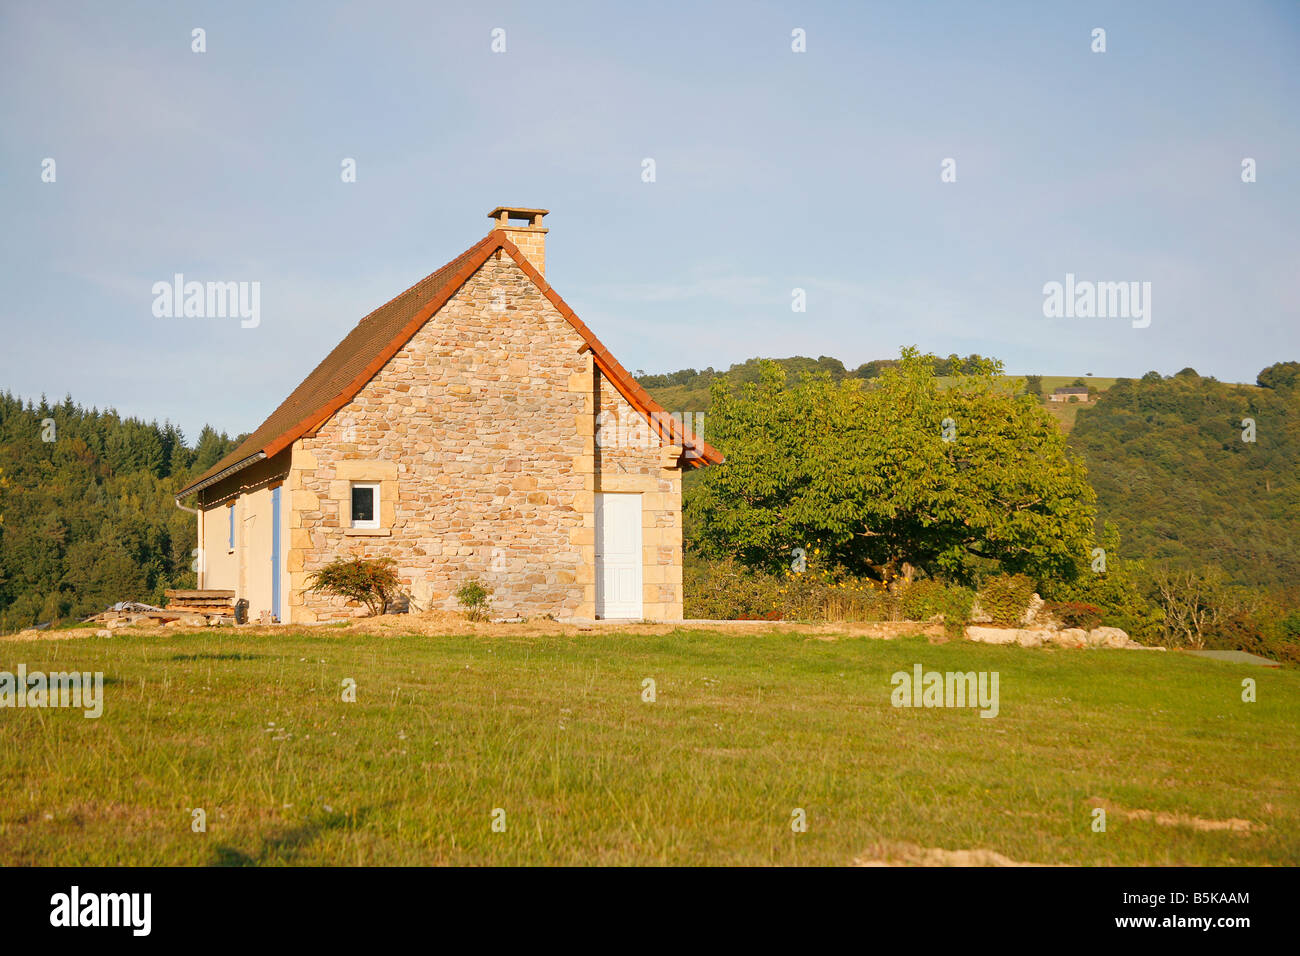 Stone house on hill in green garden Correze France Stock Photo